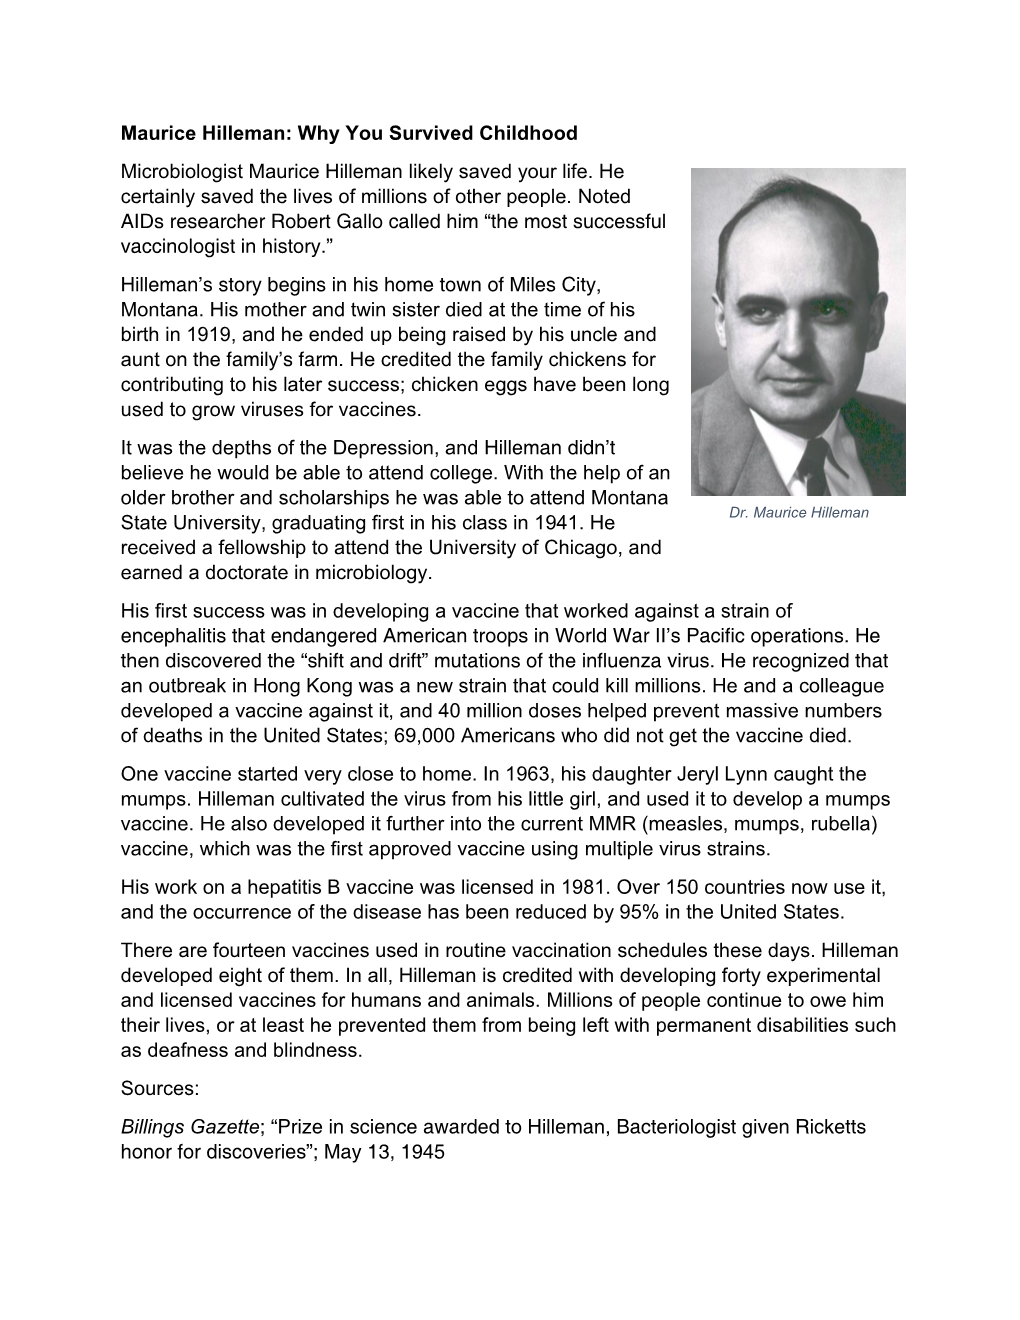 Maurice Hilleman: Why You Survived Childhood Microbiologist Maurice Hilleman Likely Saved Your Life